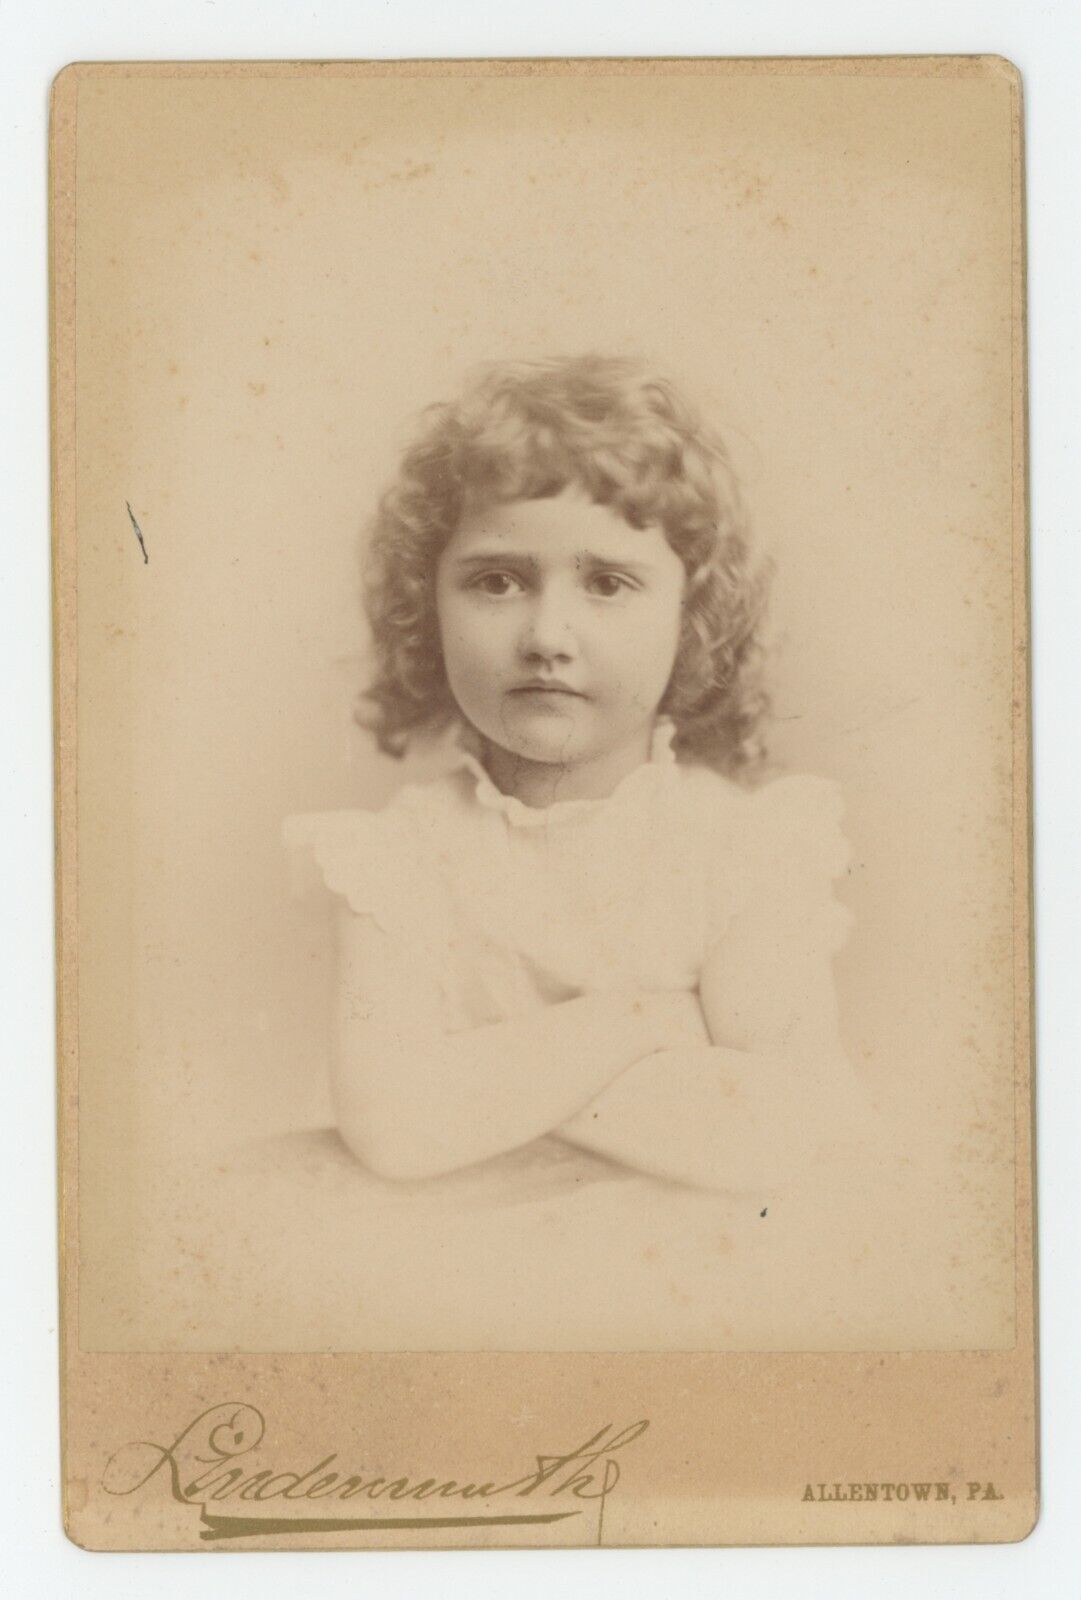 Antique c1880s Cabinet Card Adorable Little Girl With Curly Hair Allentown, PA